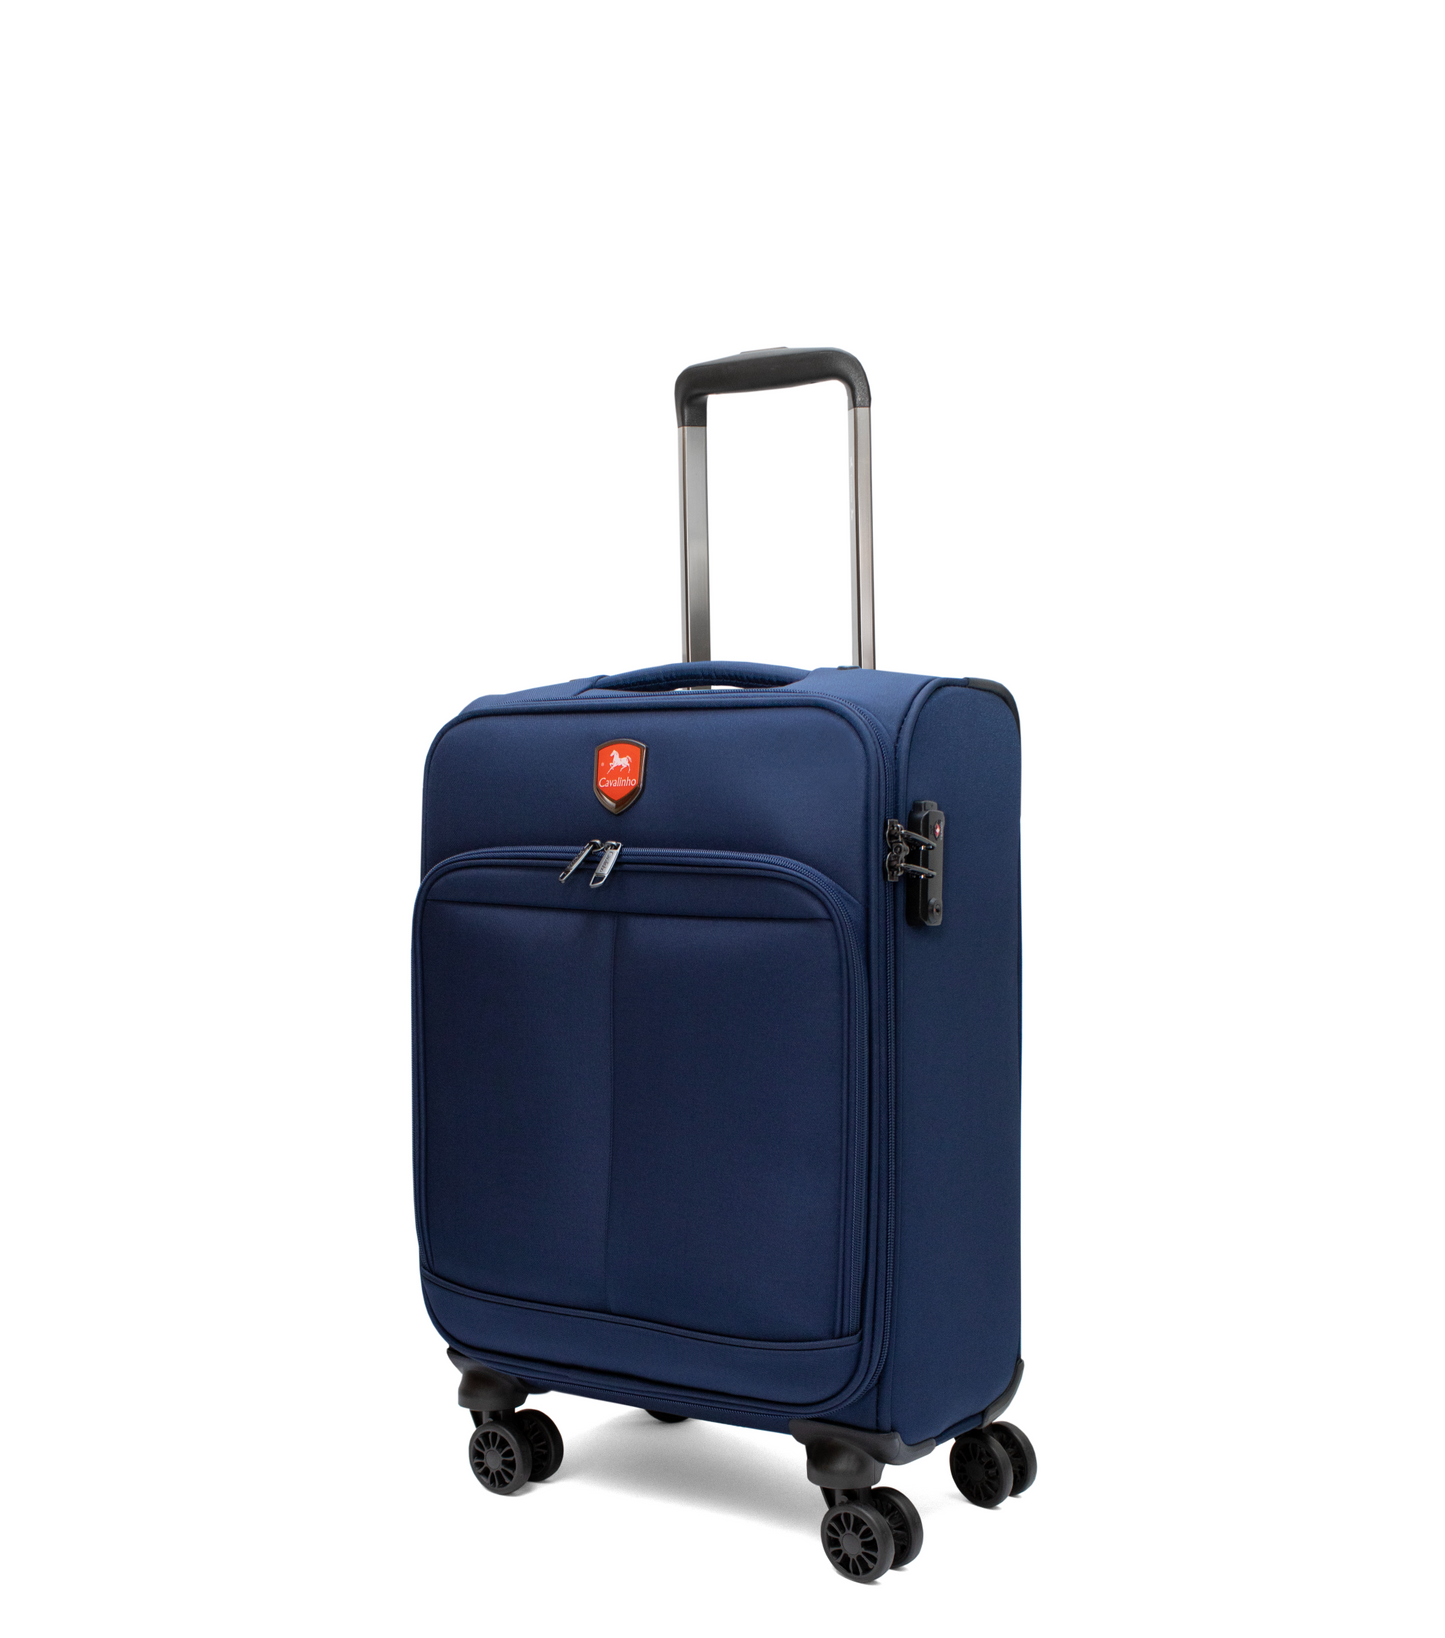 Cavalinho Carry-on Softside Cabin Luggage (16" or 19") - 19 inch SteelBlue - 68020003.03.19_2